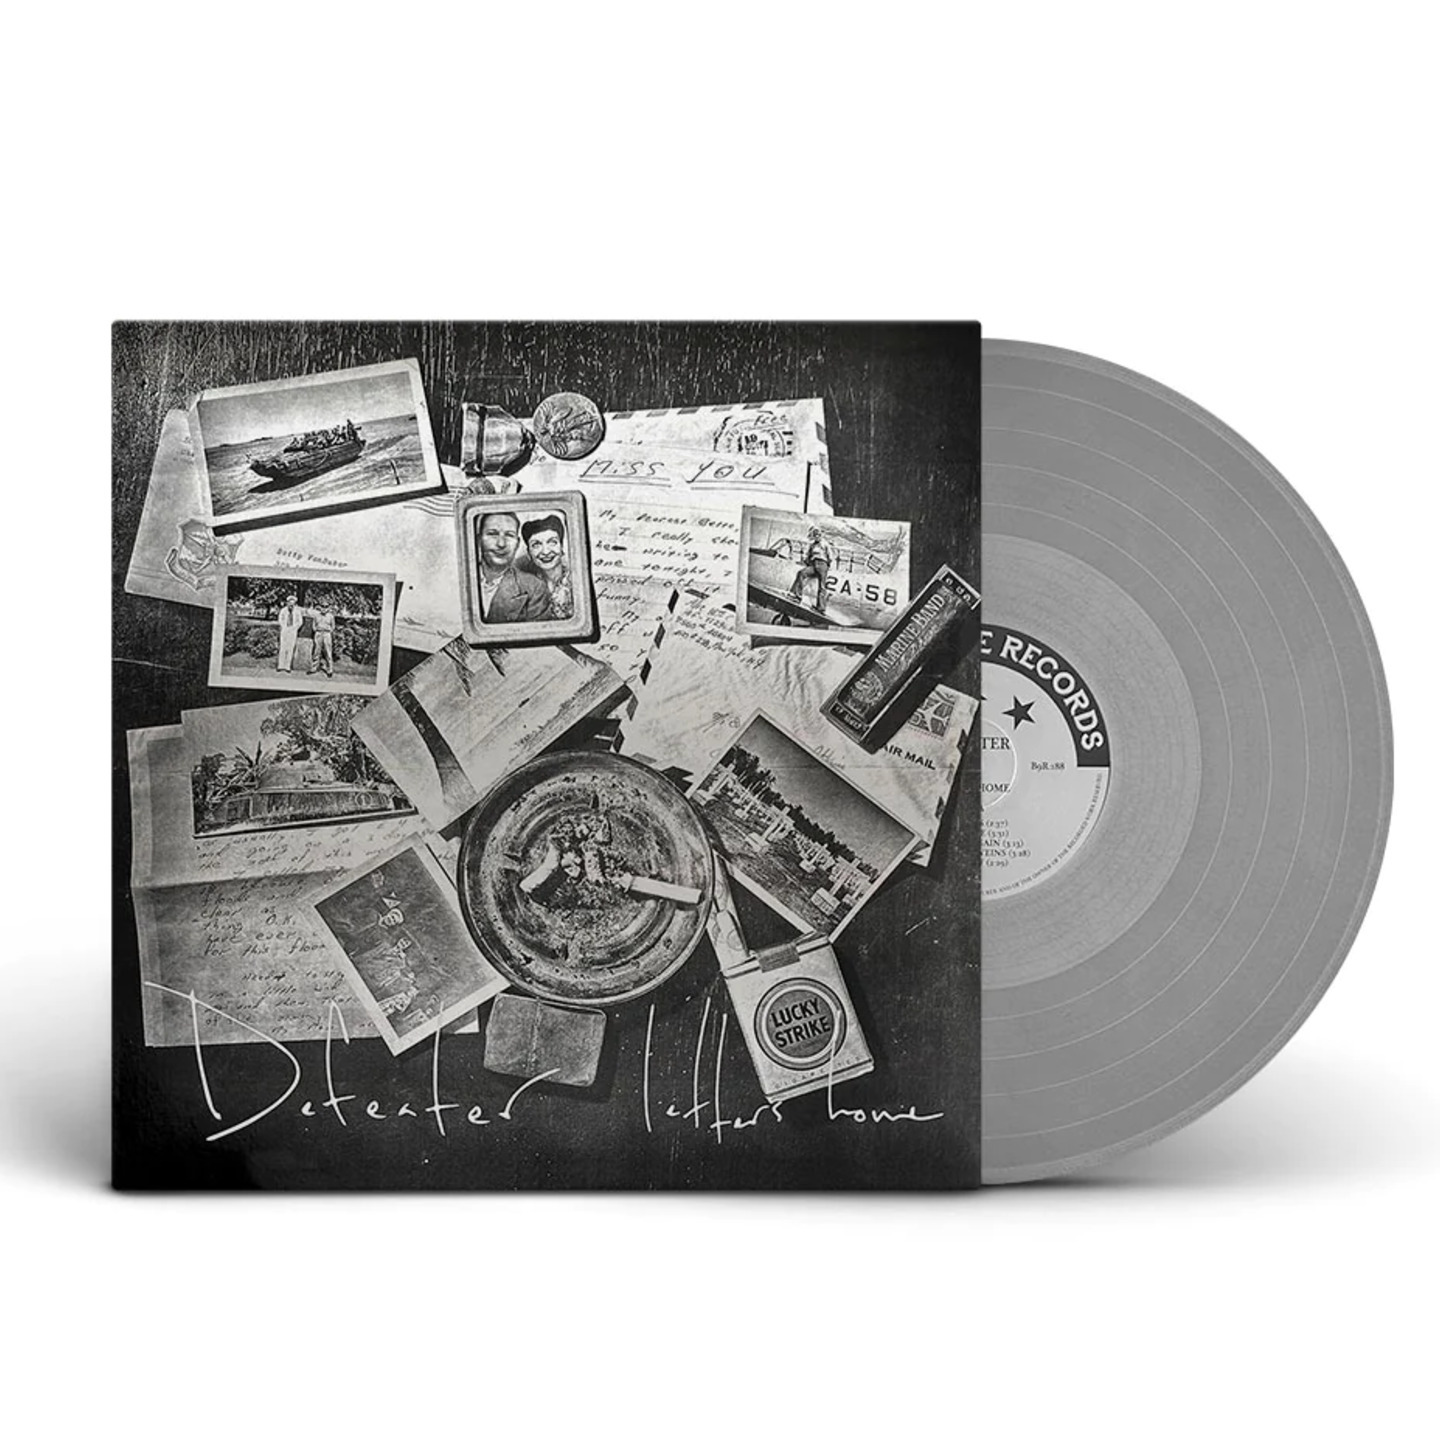 DEFEATER - Letters Home: Silver Anniversary Edition LP (Silver vinyl)